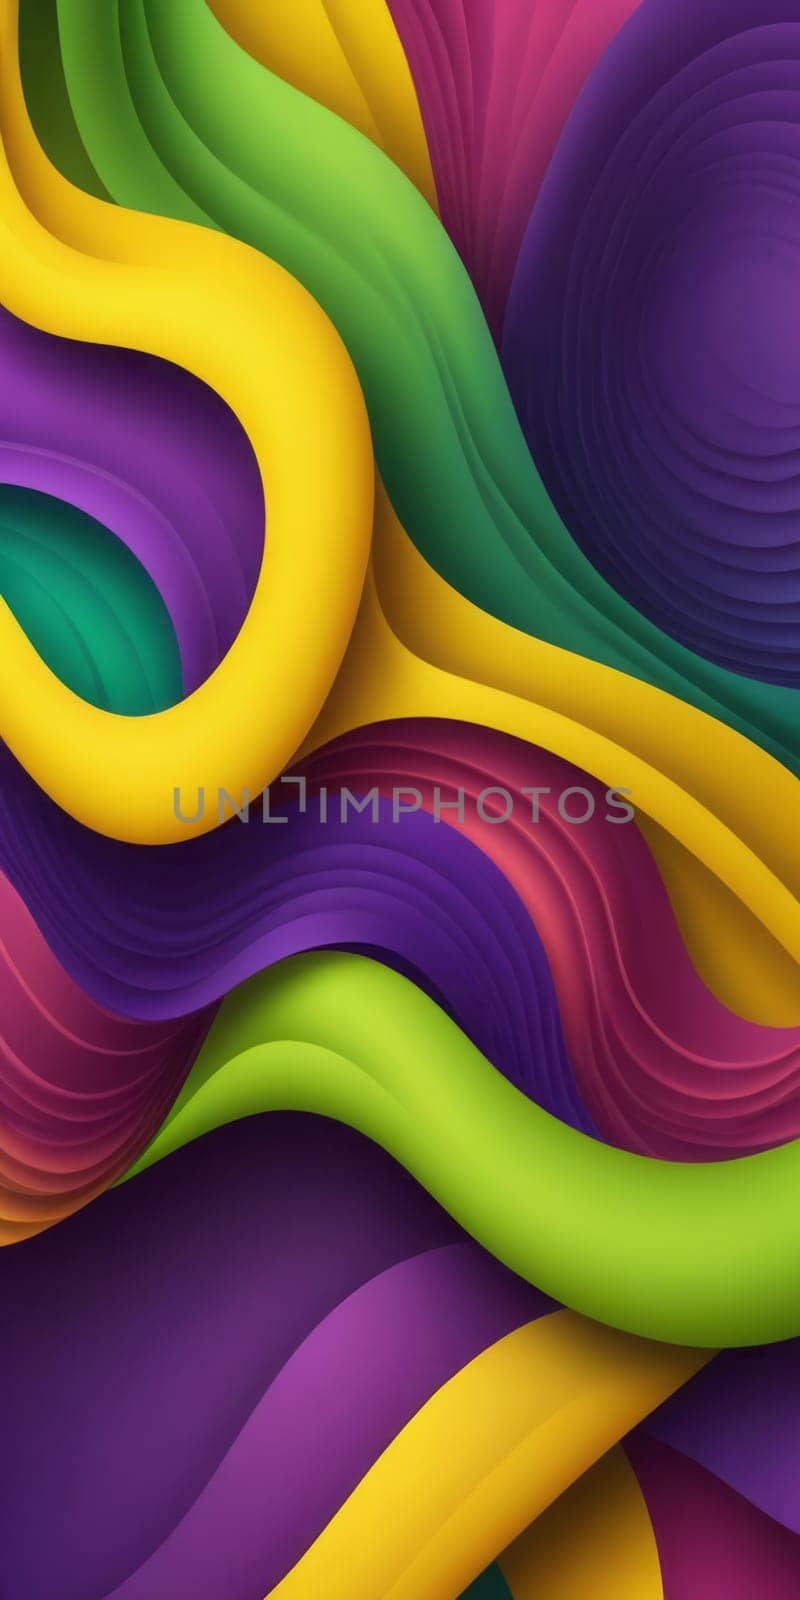 Twisted Shapes in Purple Greenyellow by nkotlyar